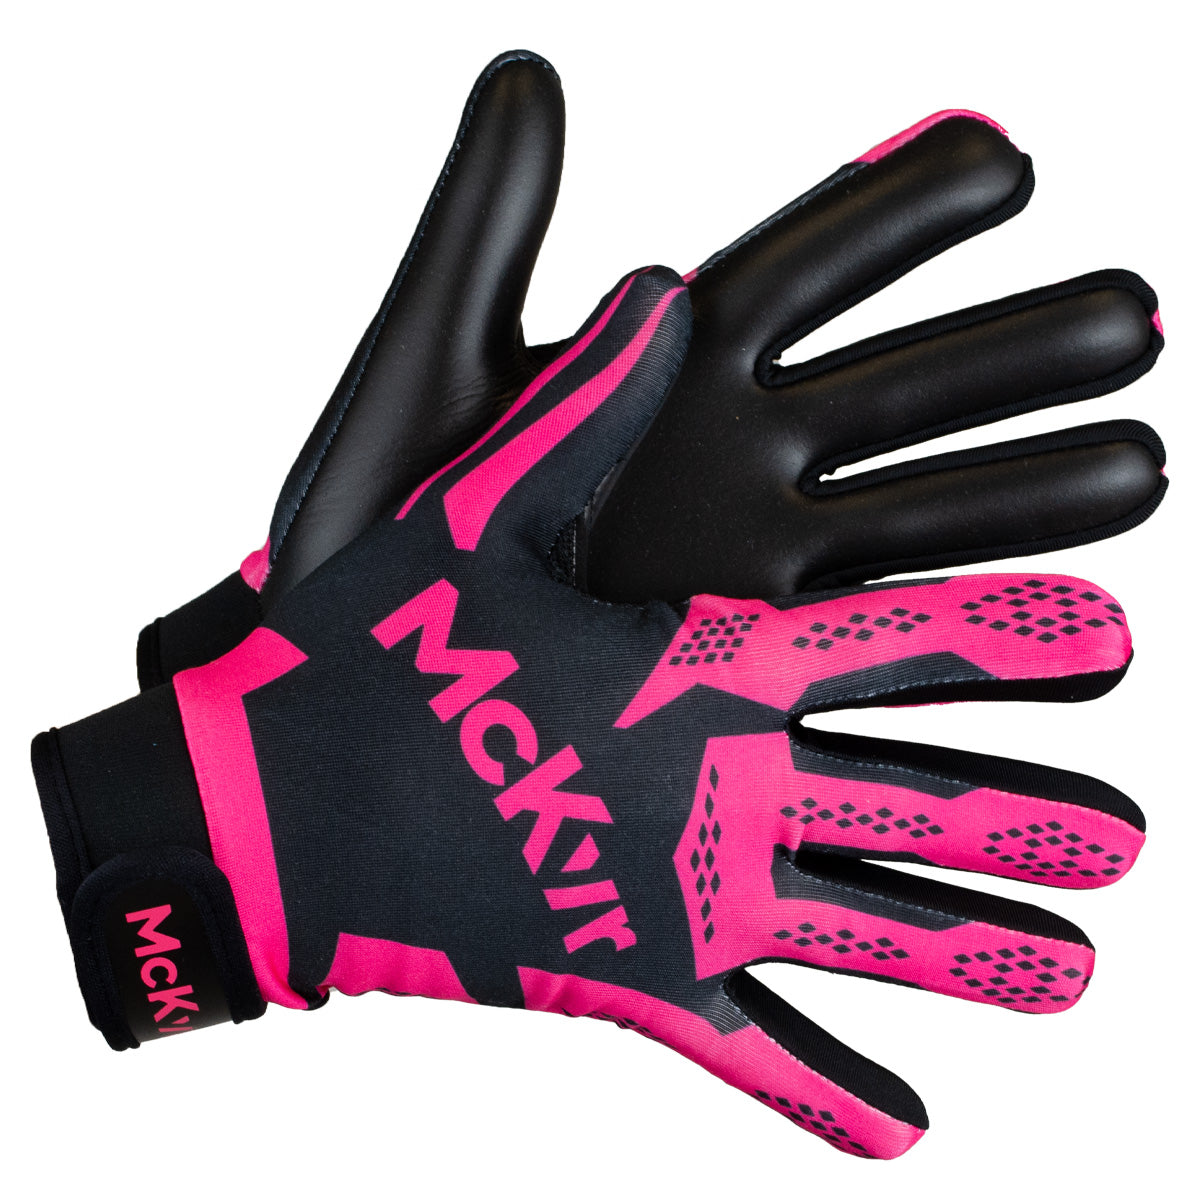 Mc Keever 2.0 Gaelic Gloves - Youth - Black/Pink